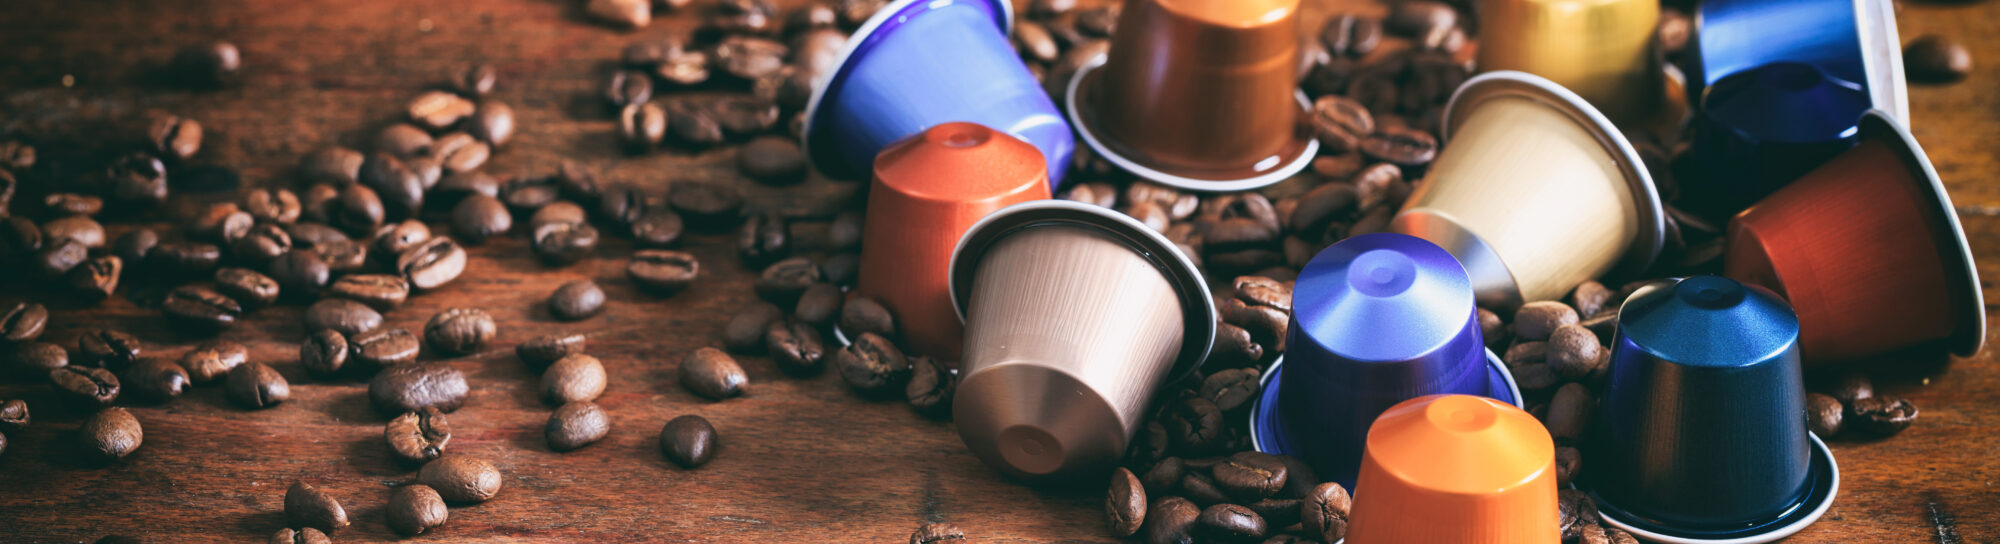 The EU's Misguided Ban on Coffee Capsules